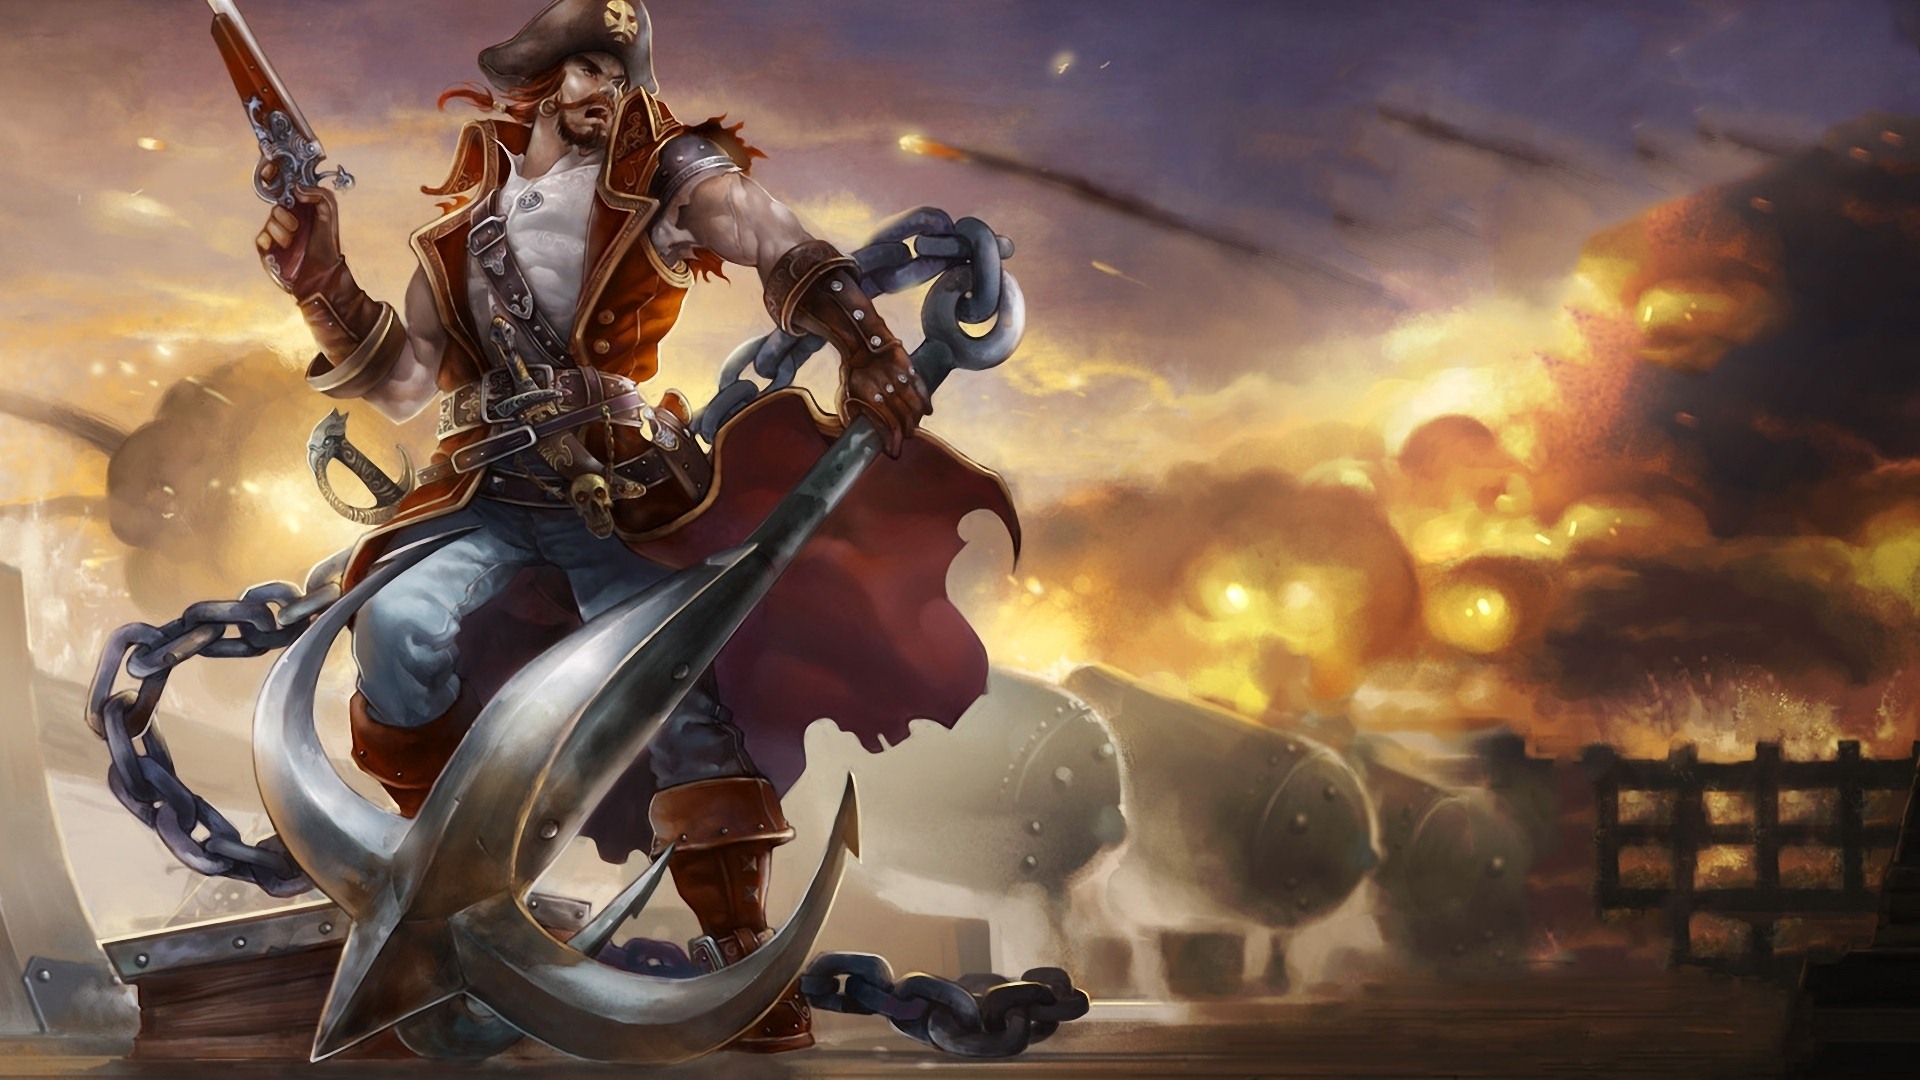 League of Legends game HD wallpapers #18 - 1920x1080